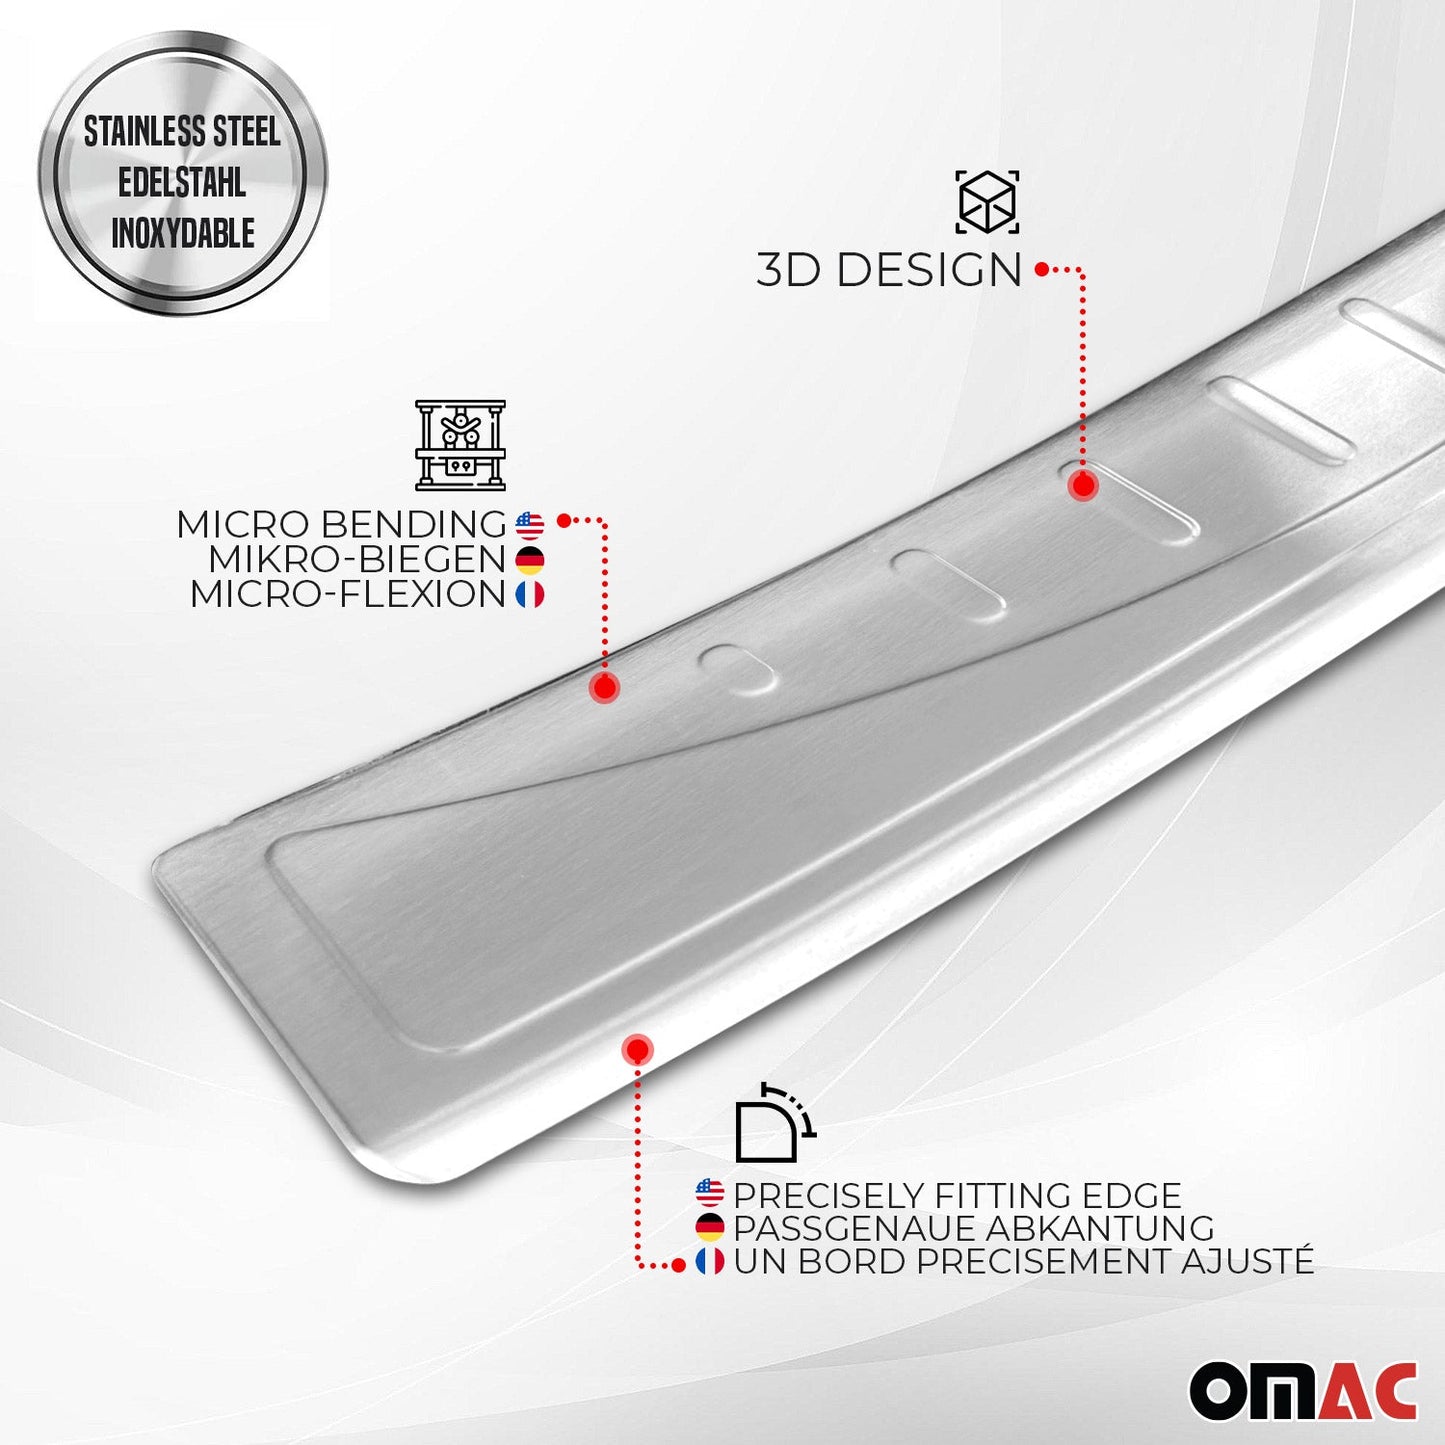 OMAC For Mercedes E Class S212 2011-2013 Rear Bumper Trunk Sill Cover Brushed S.Steel 4716095T